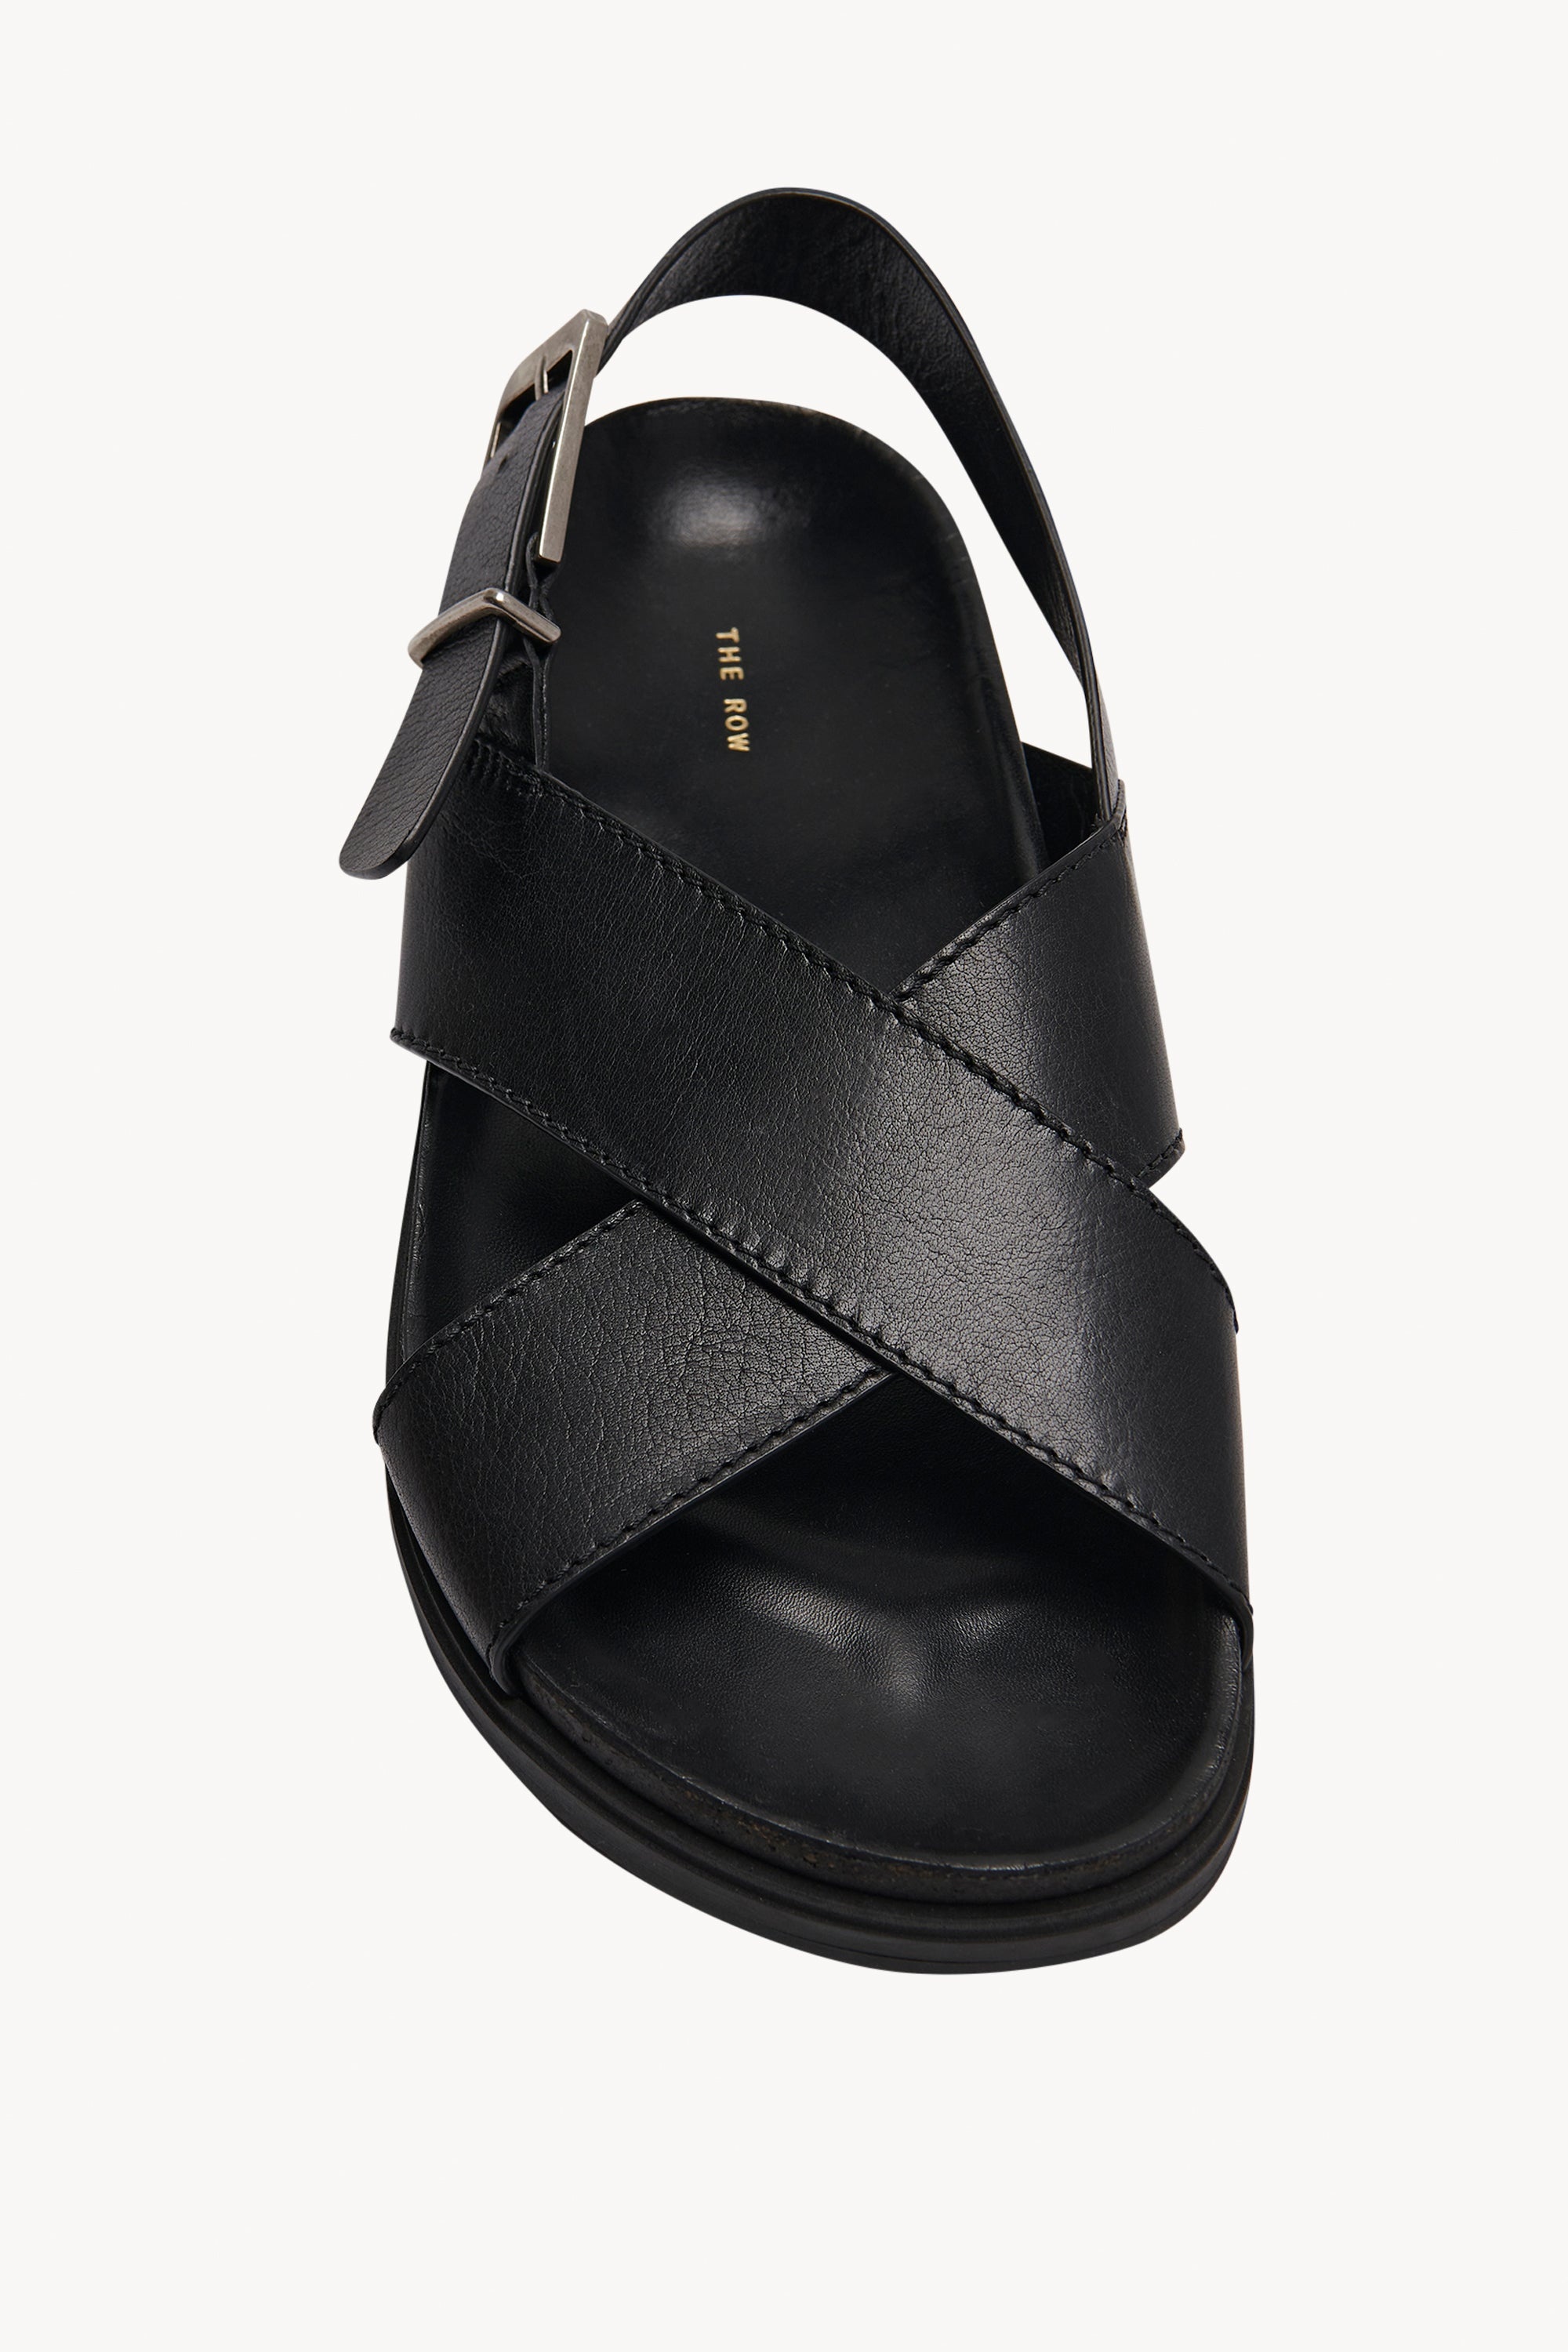 Buckle Sandal in Leather - 3